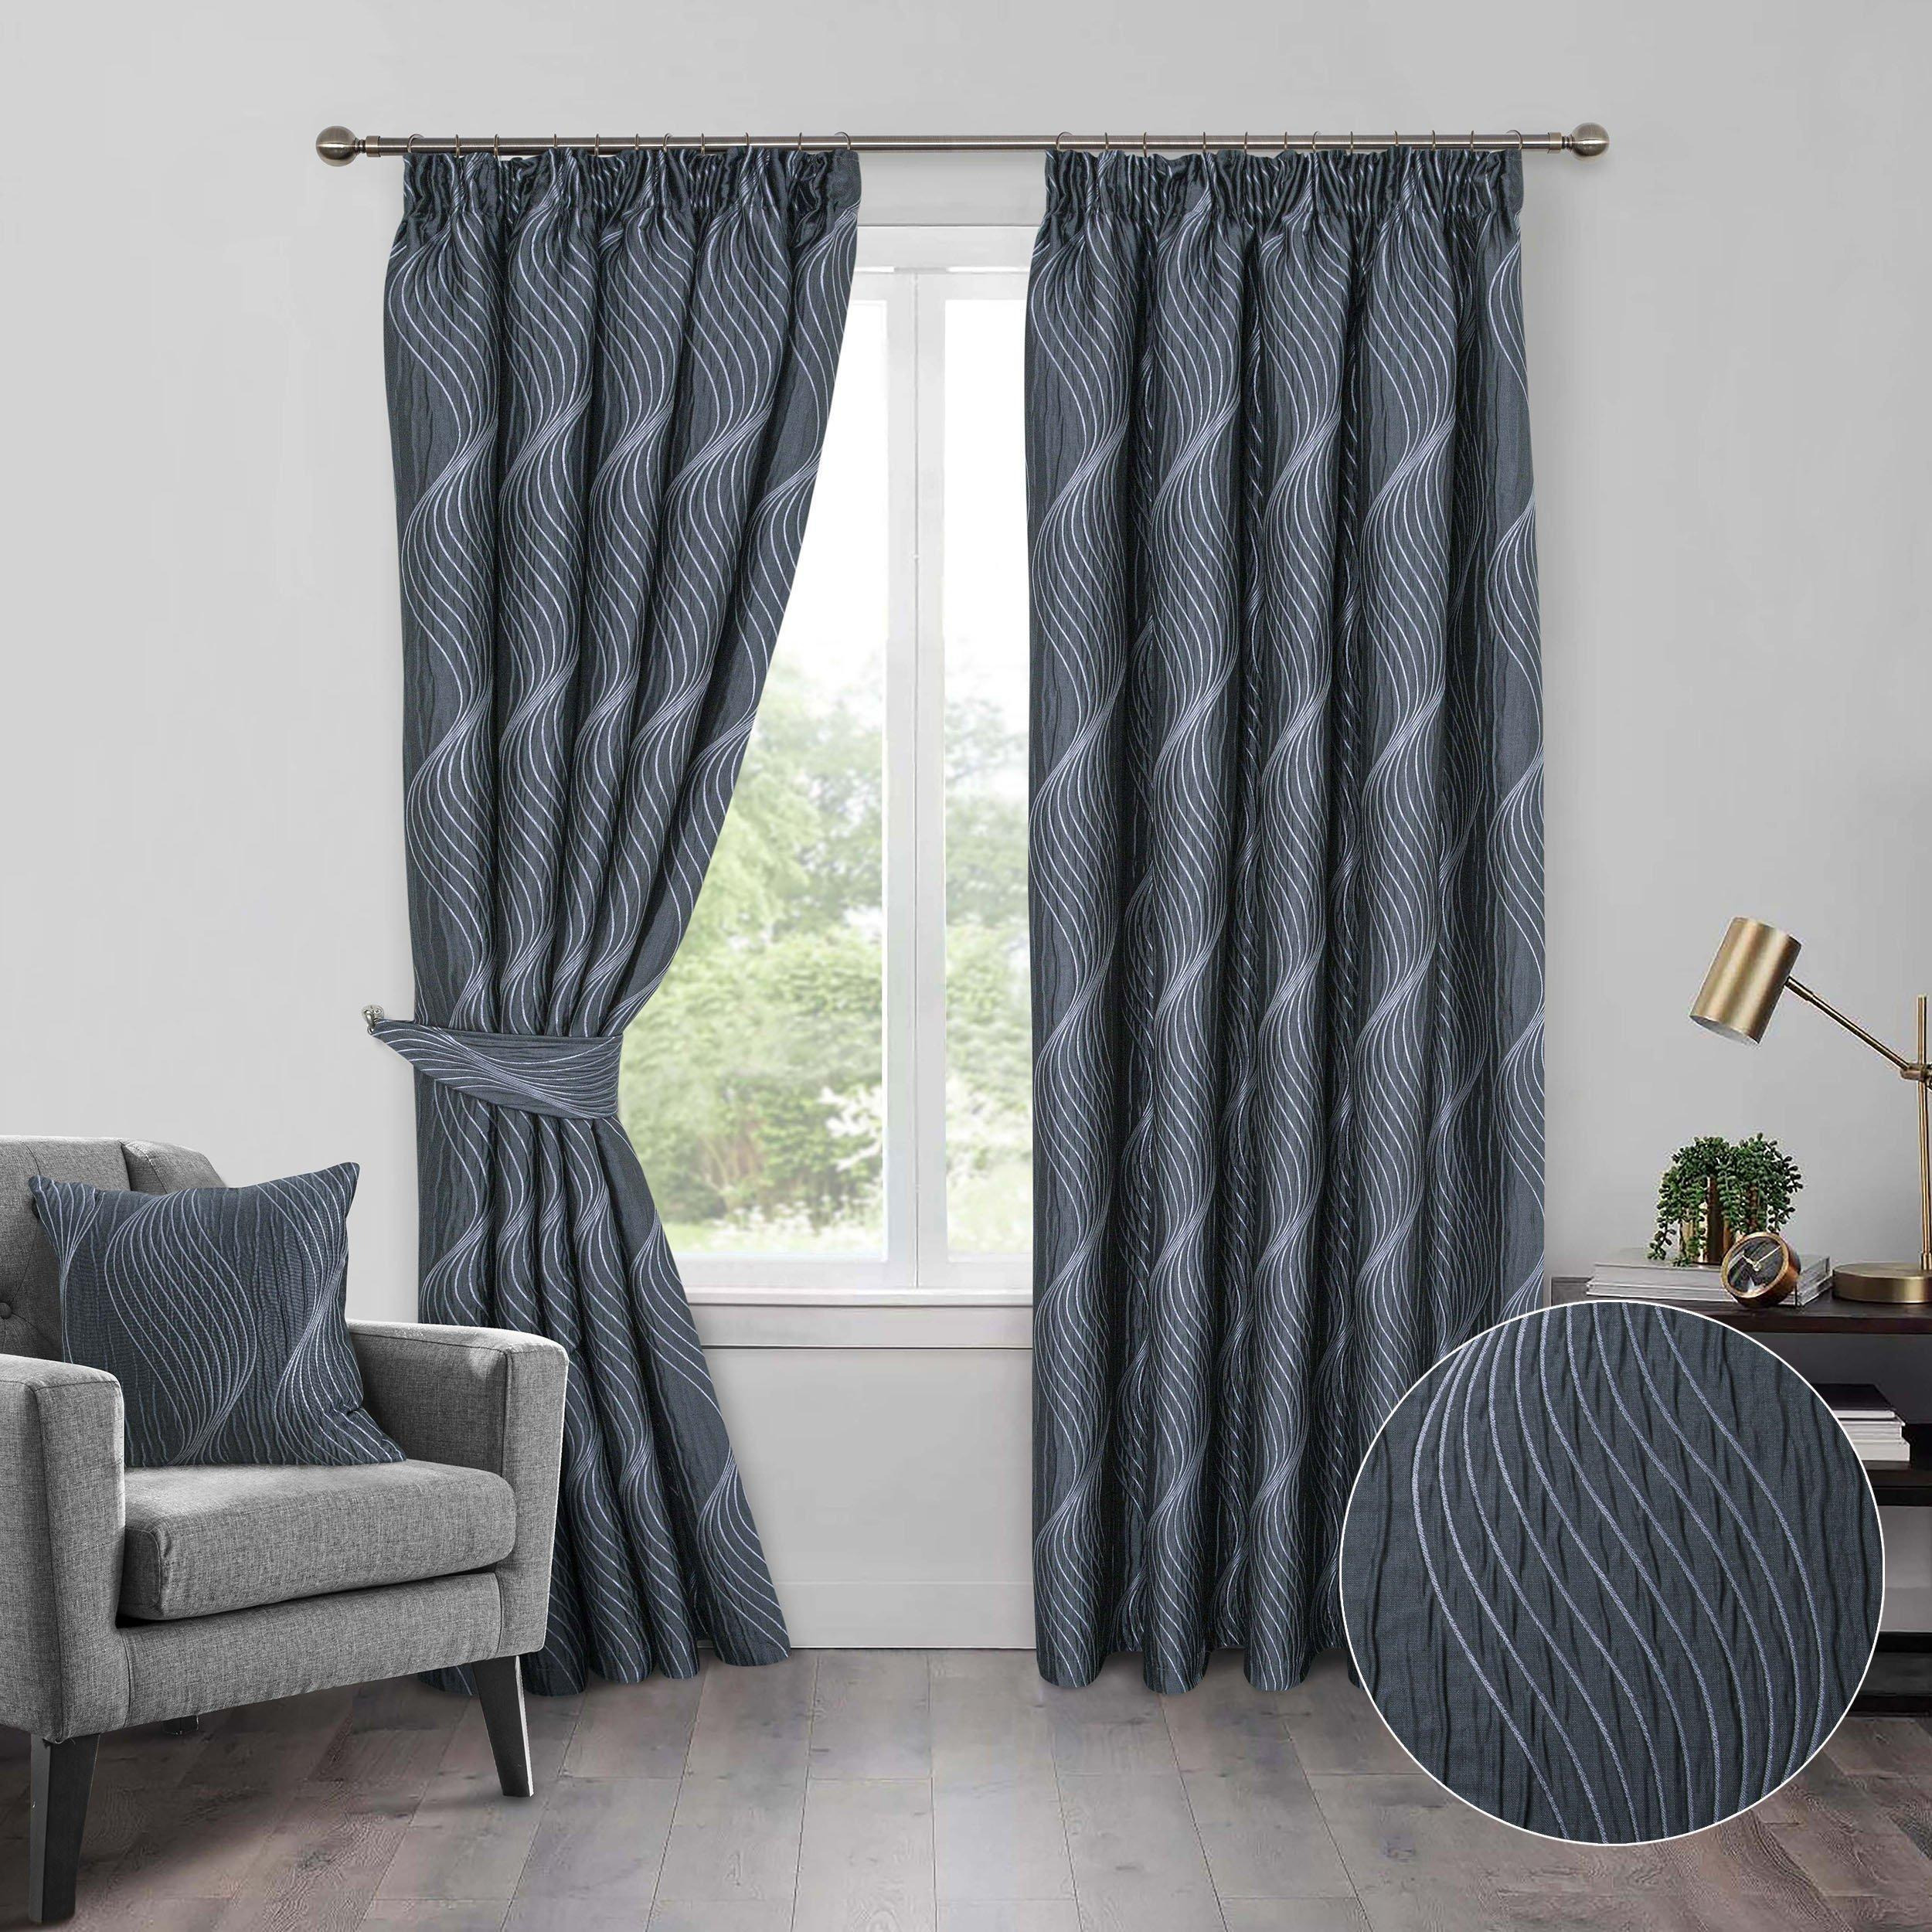 Zen Fully Lined 3 Inches Pencil Pleat Curtains pair - image 1